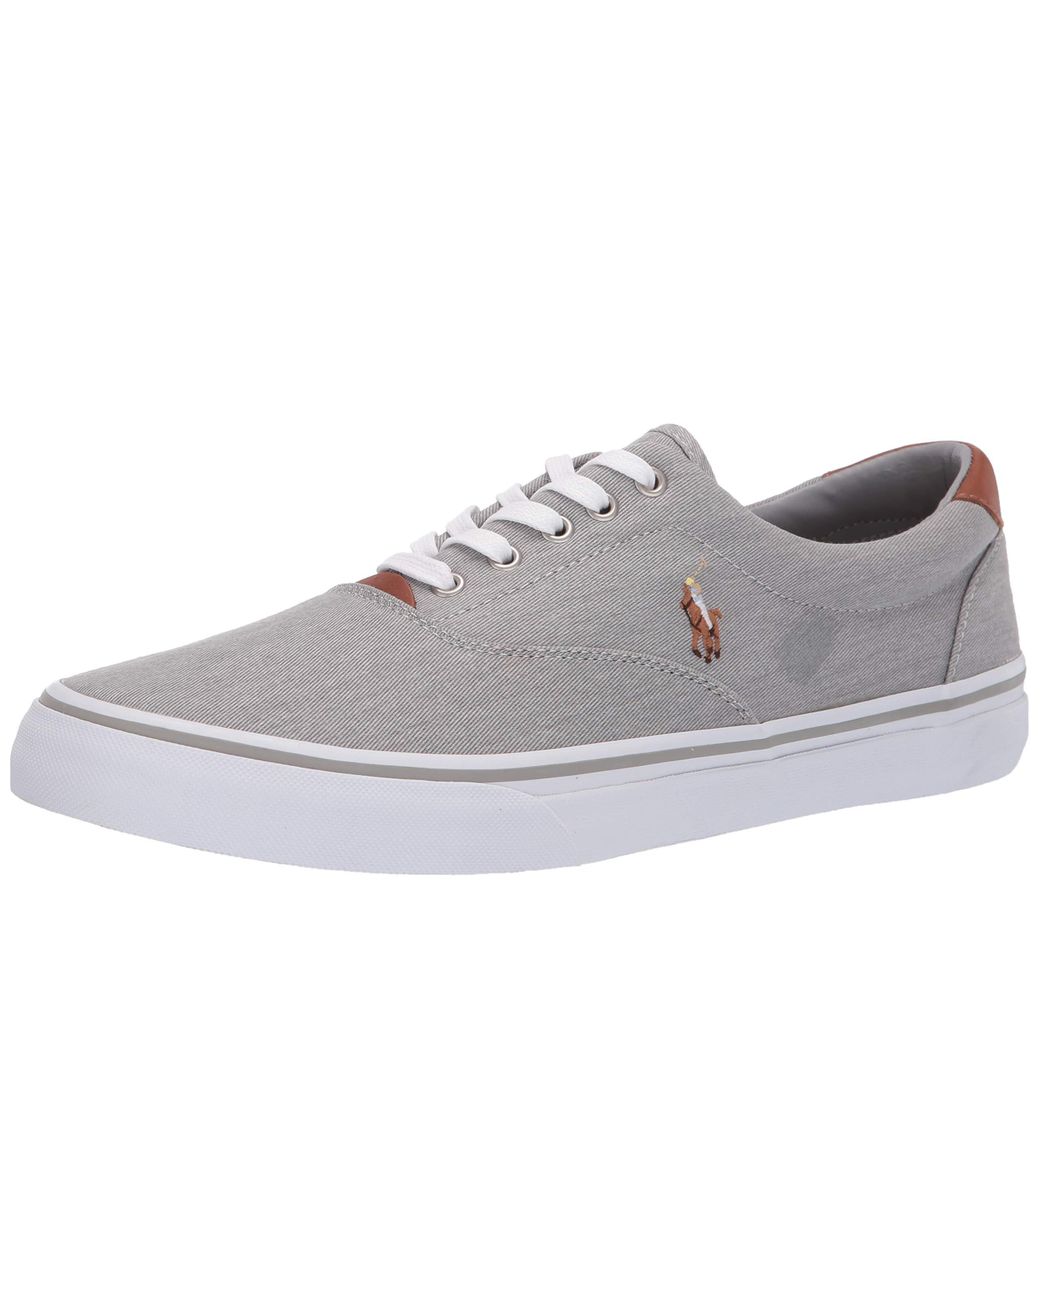 dizzy Panorama I lost my way Polo Ralph Lauren Thorton Sneaker in Soft Grey (Black) for Men - Save 39% |  Lyst